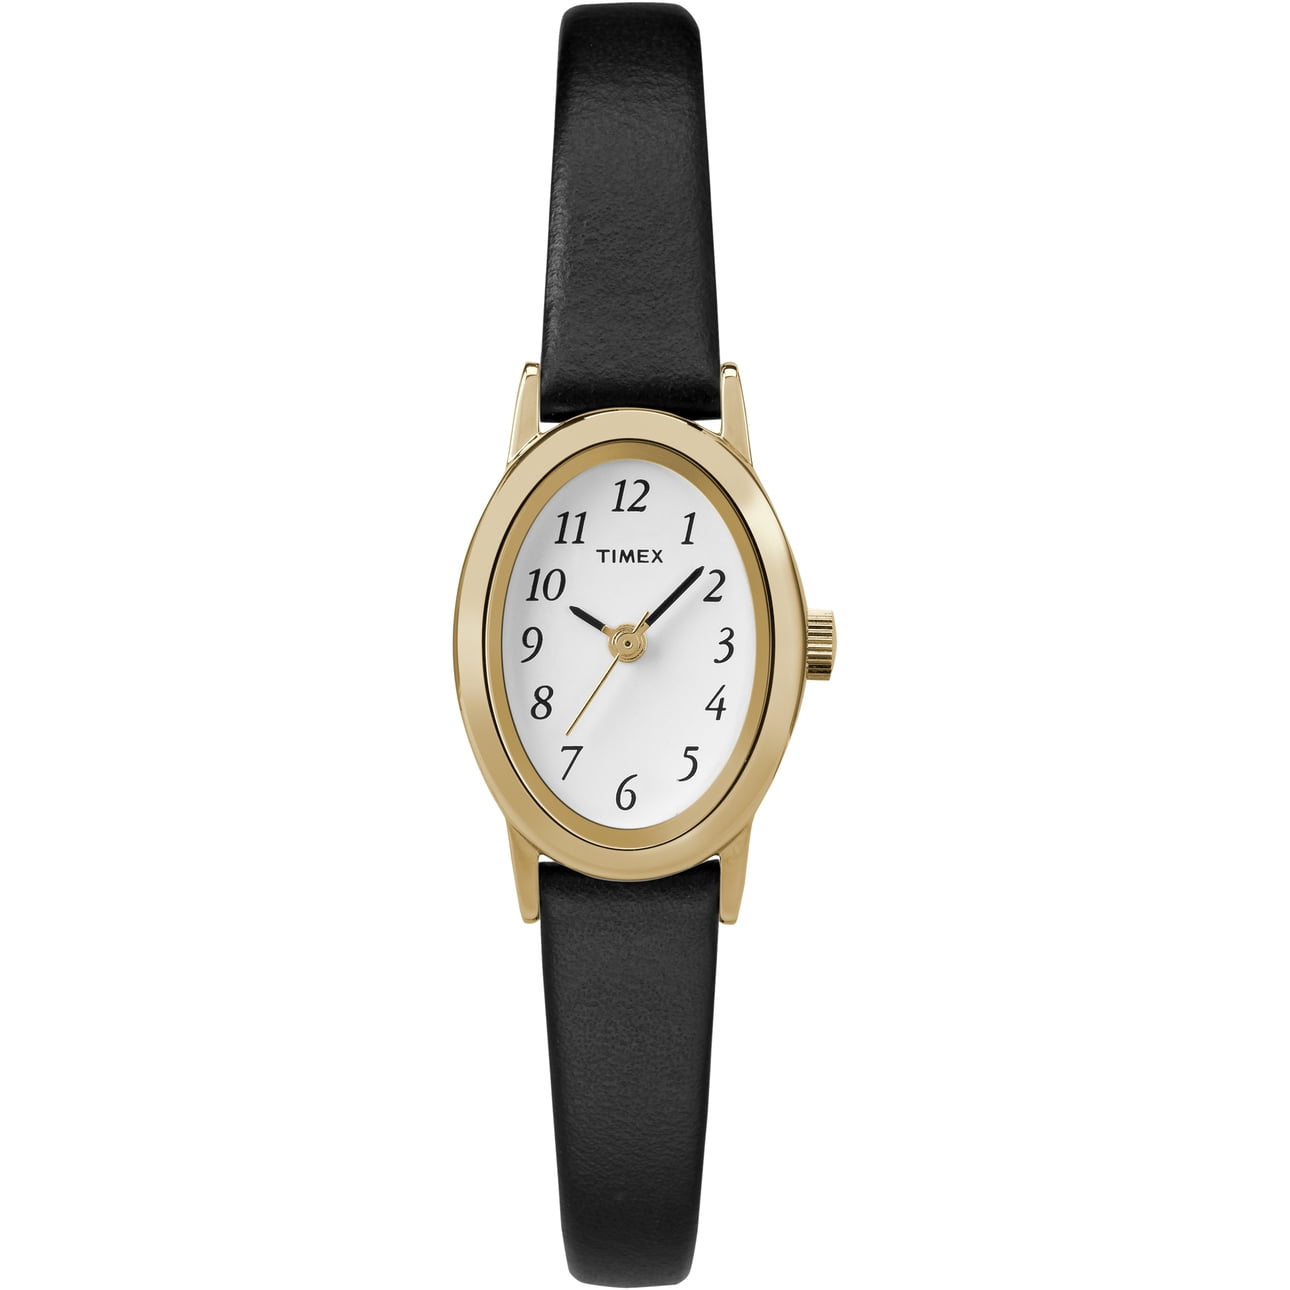 Timex Women's Cavatina Gold-Tone 18mm Classic Watch, Expansion 